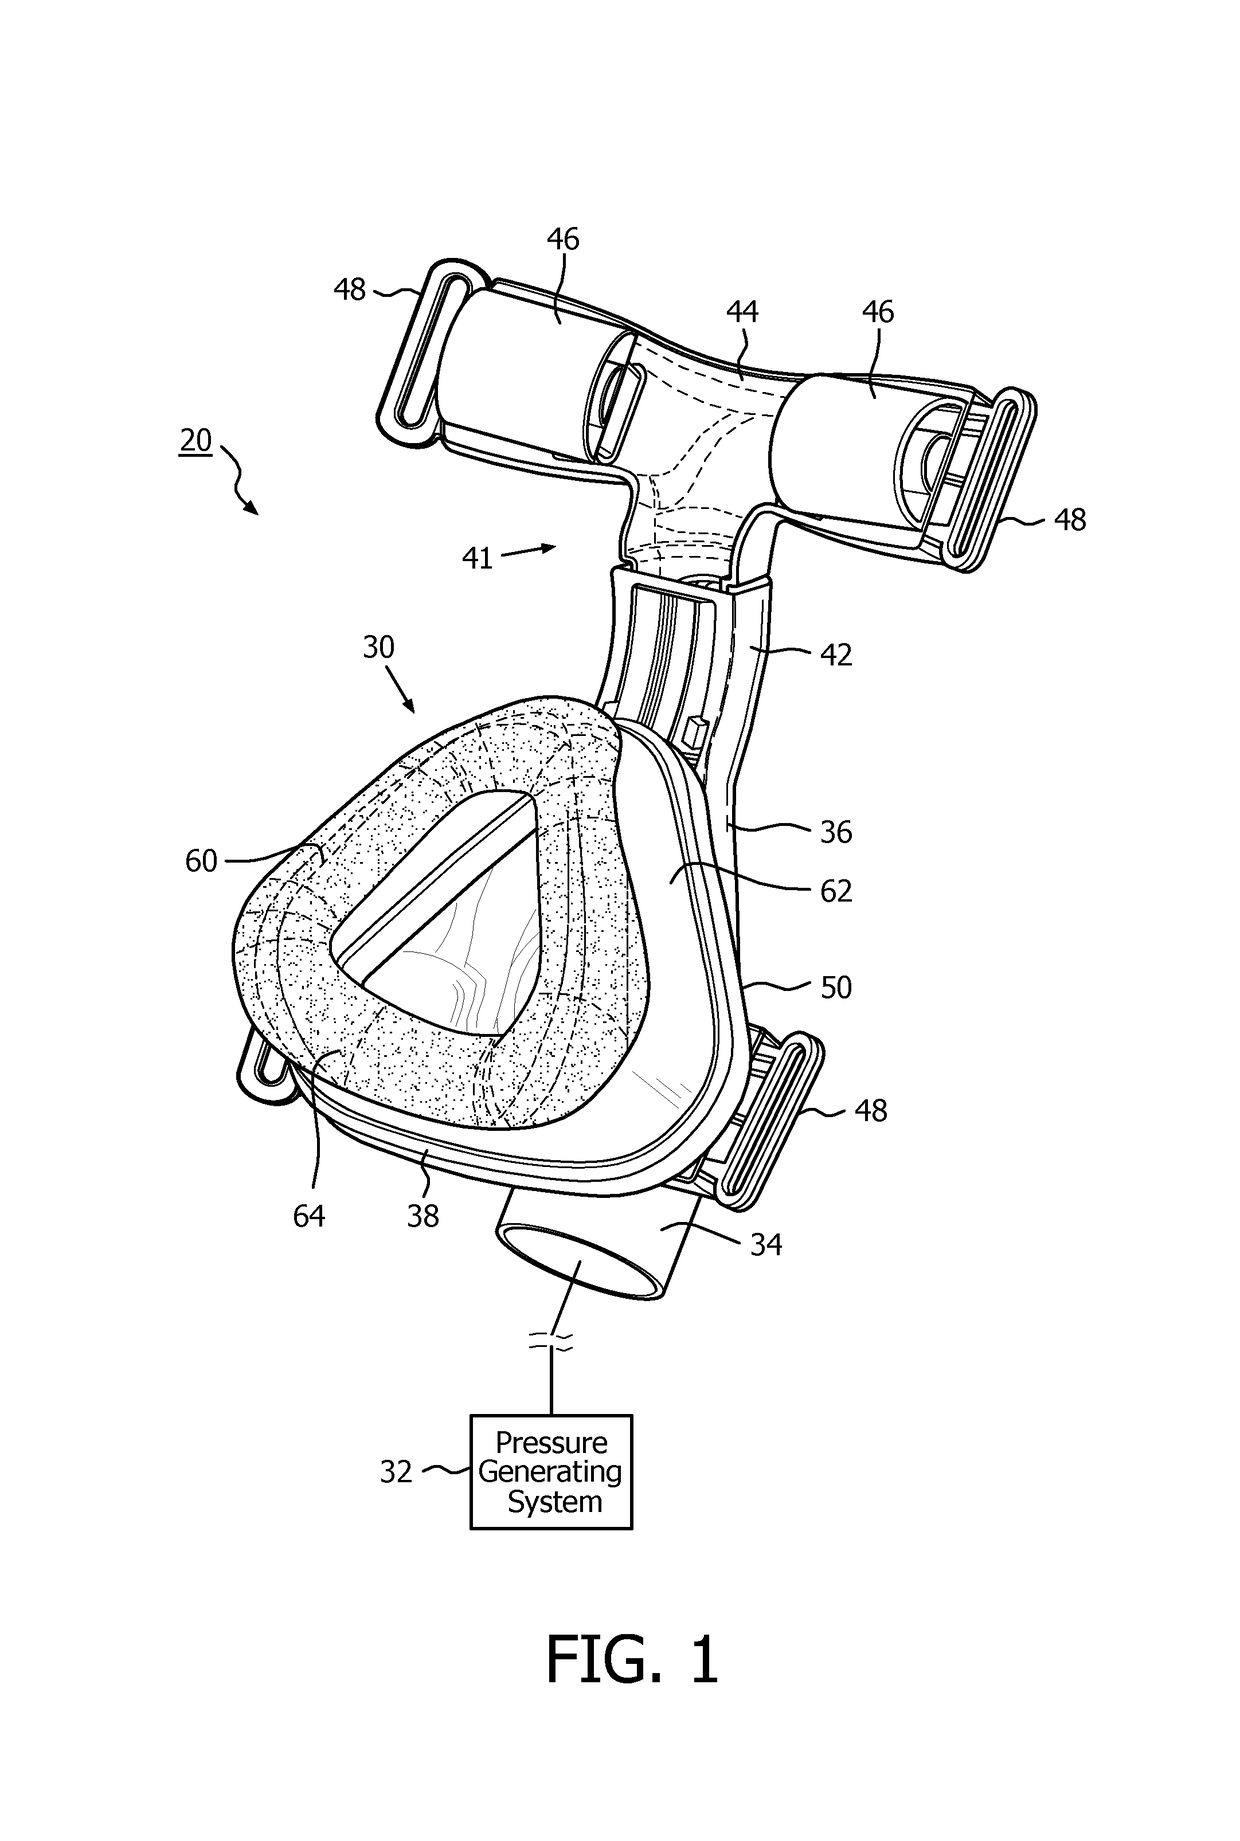 Patient interface device having an engineered surface for providing low friction and improved comfort to the user